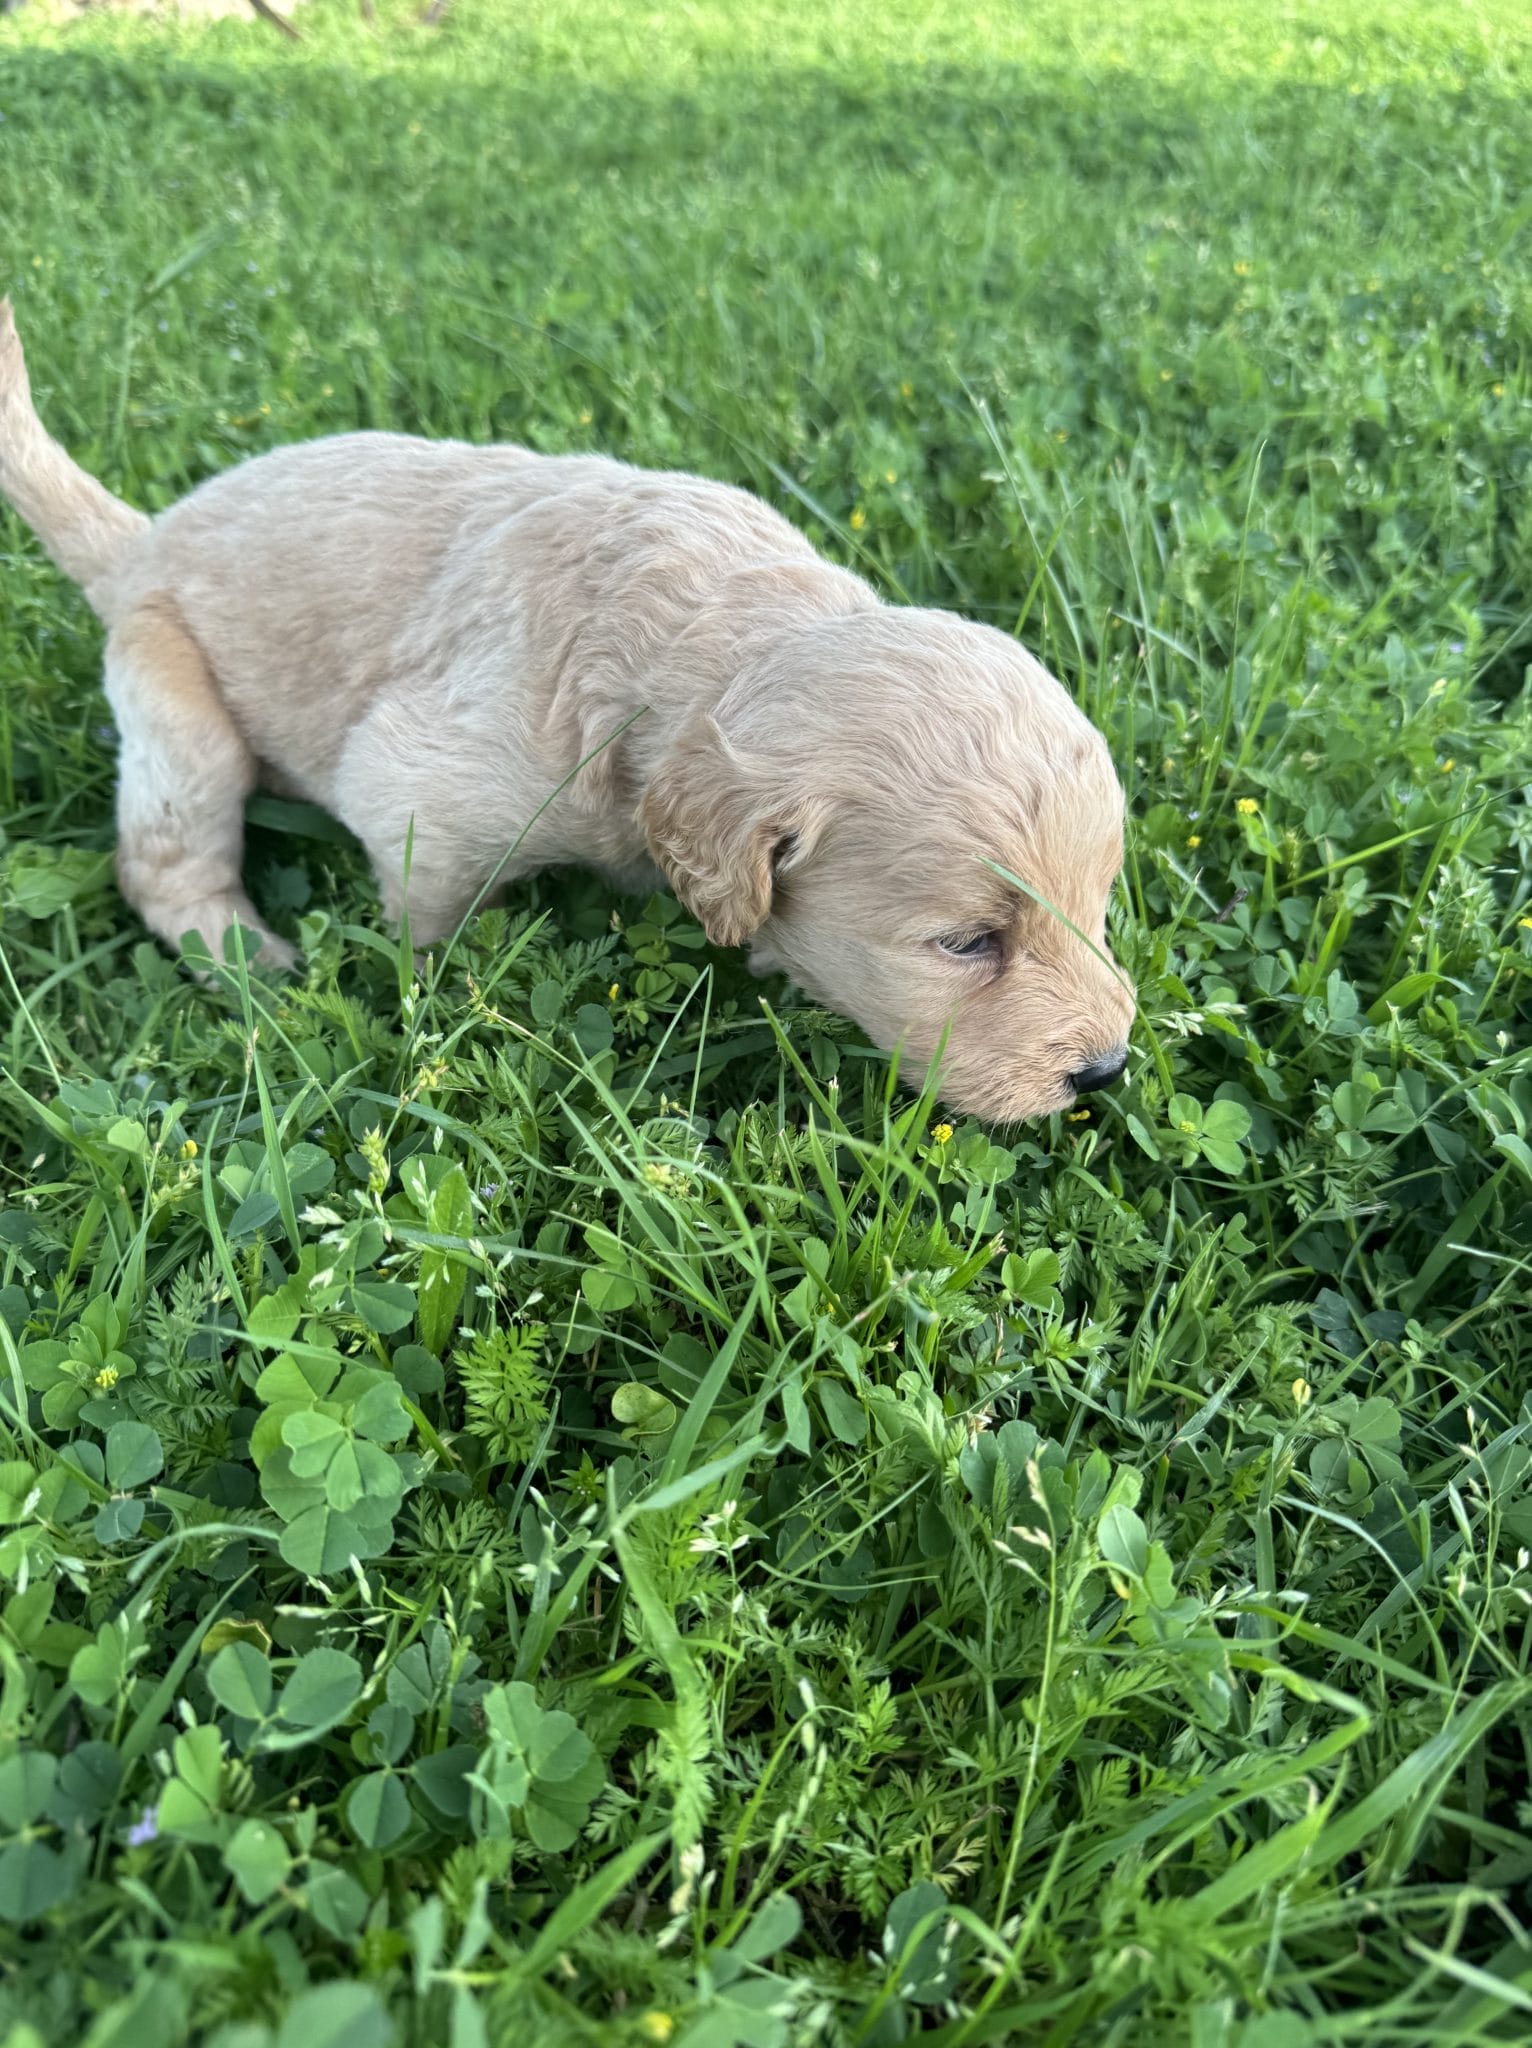 White F1B Standard Goldendoodle Puppy “Mauve” 55-65 lbs Female Puppy